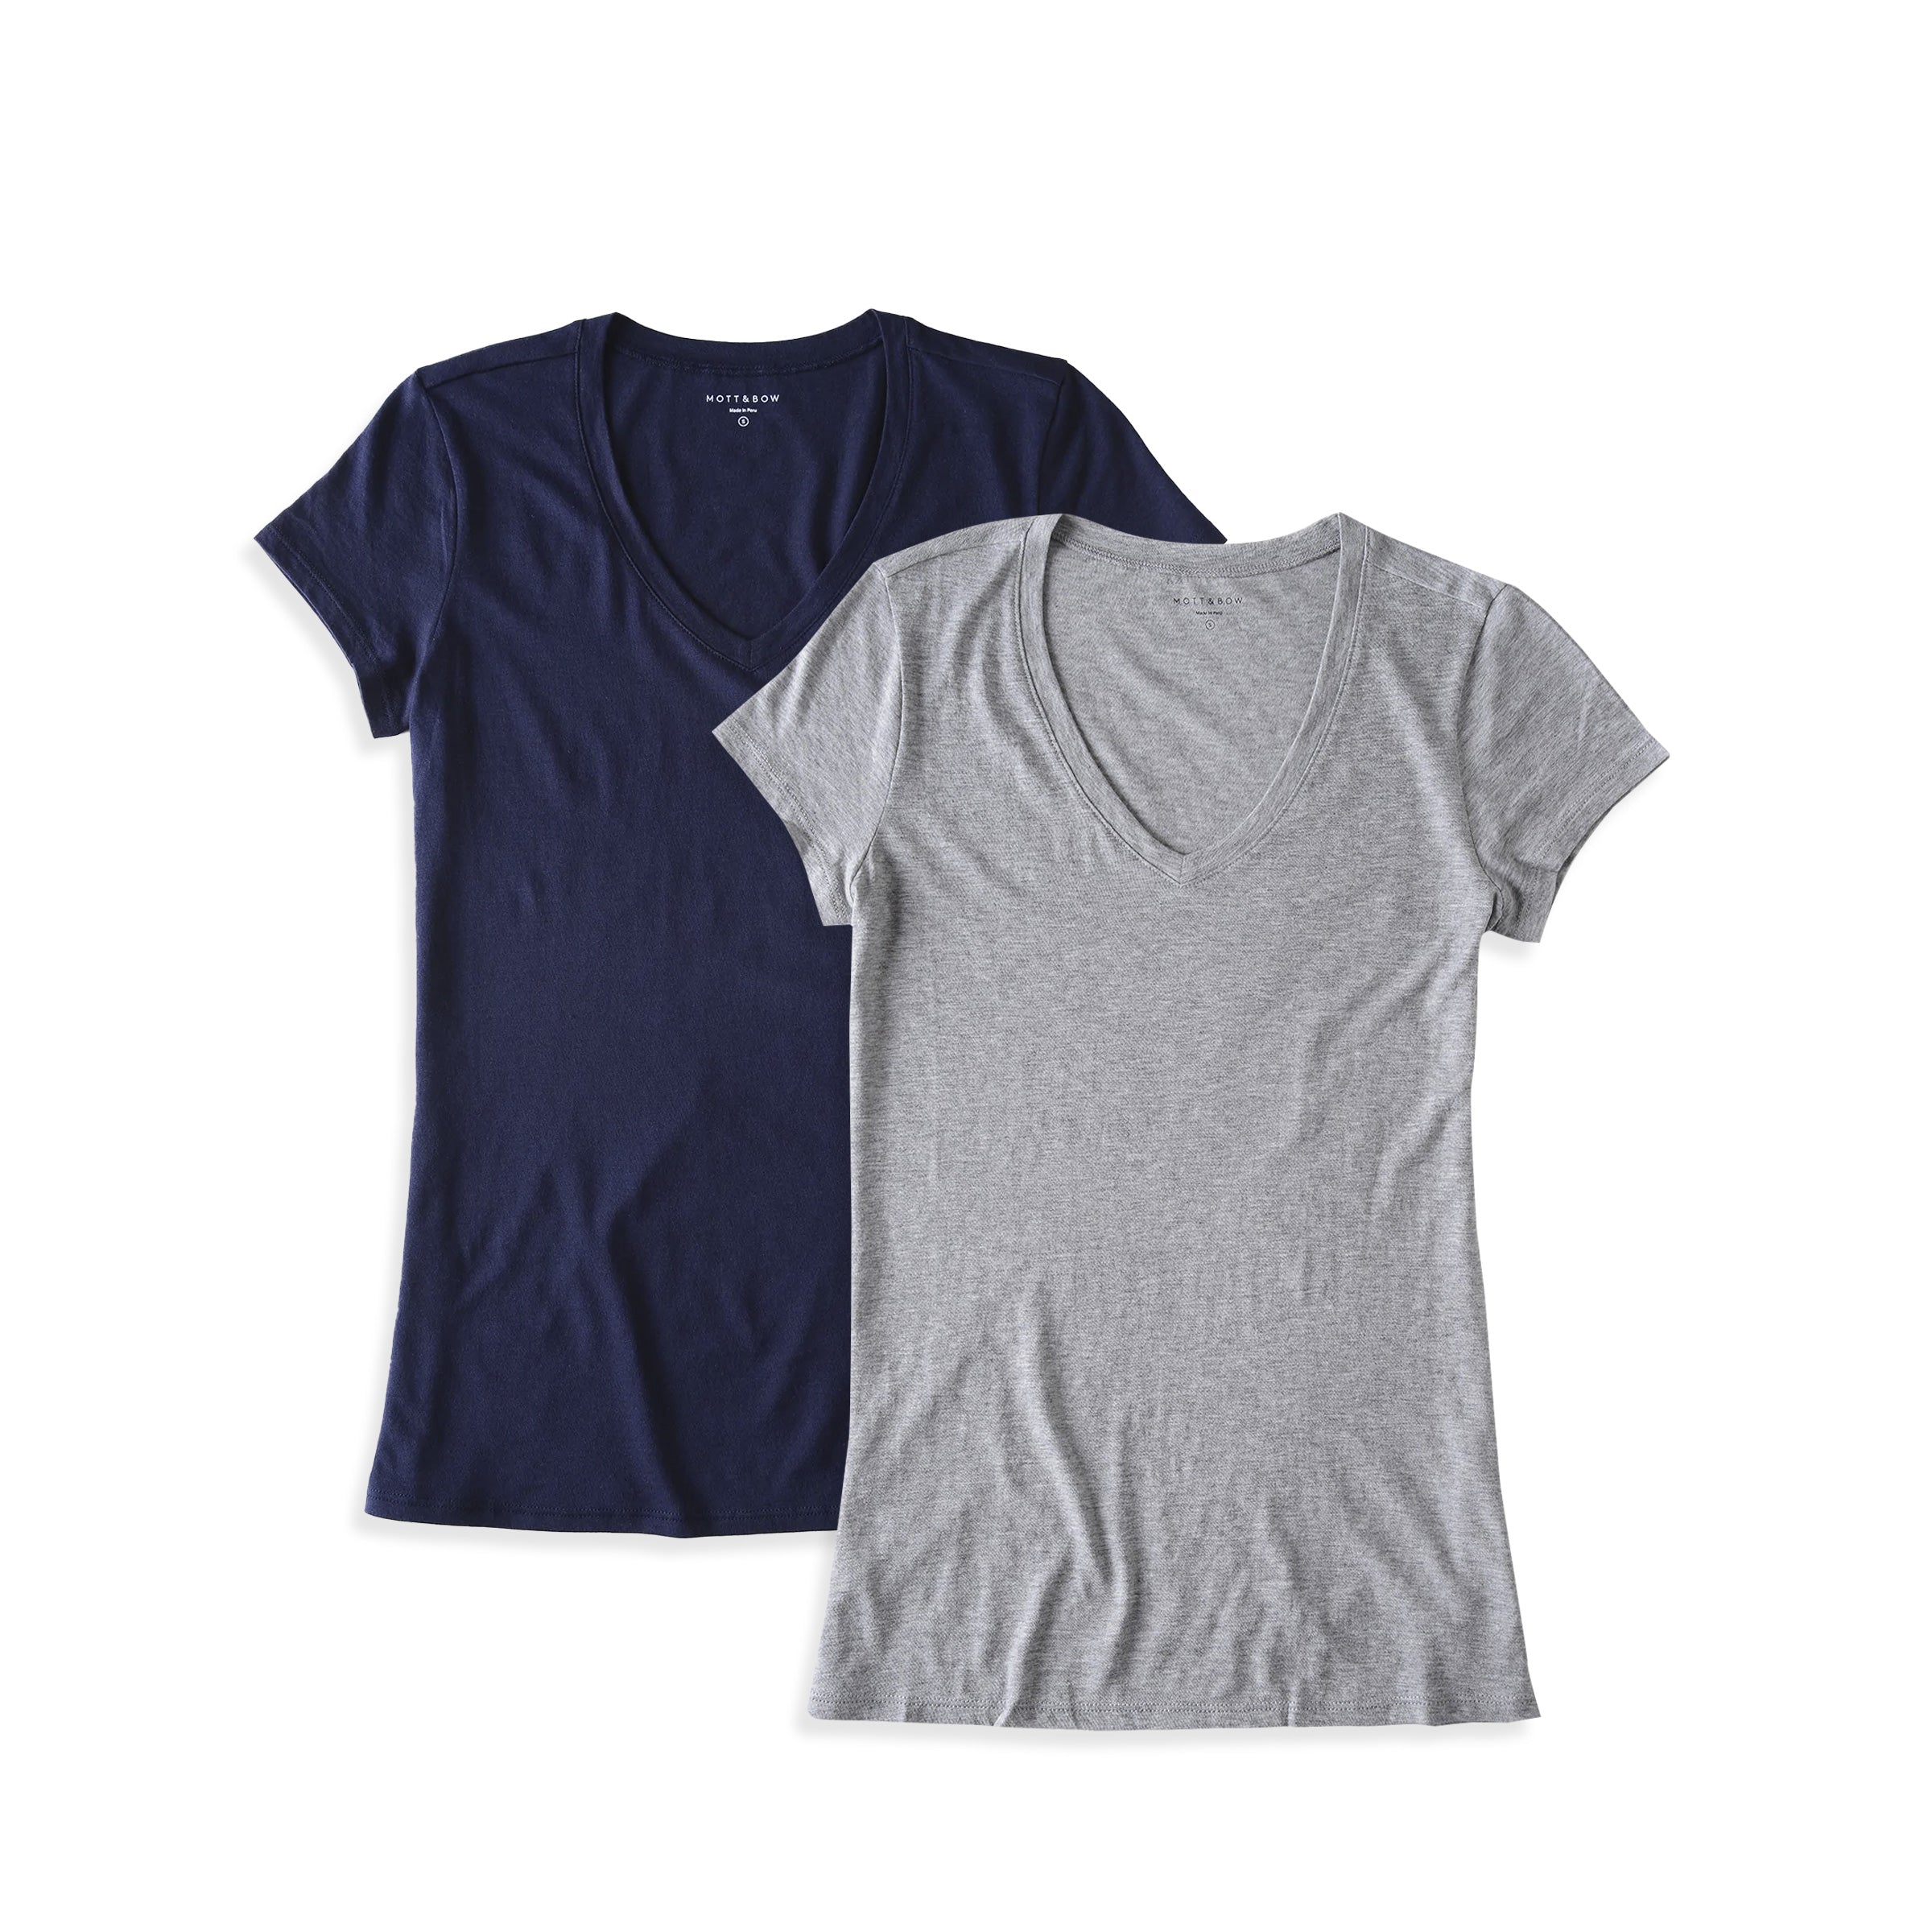  wearing Navy/Heather Gray Fitted V-Neck Marcy 2-Pack